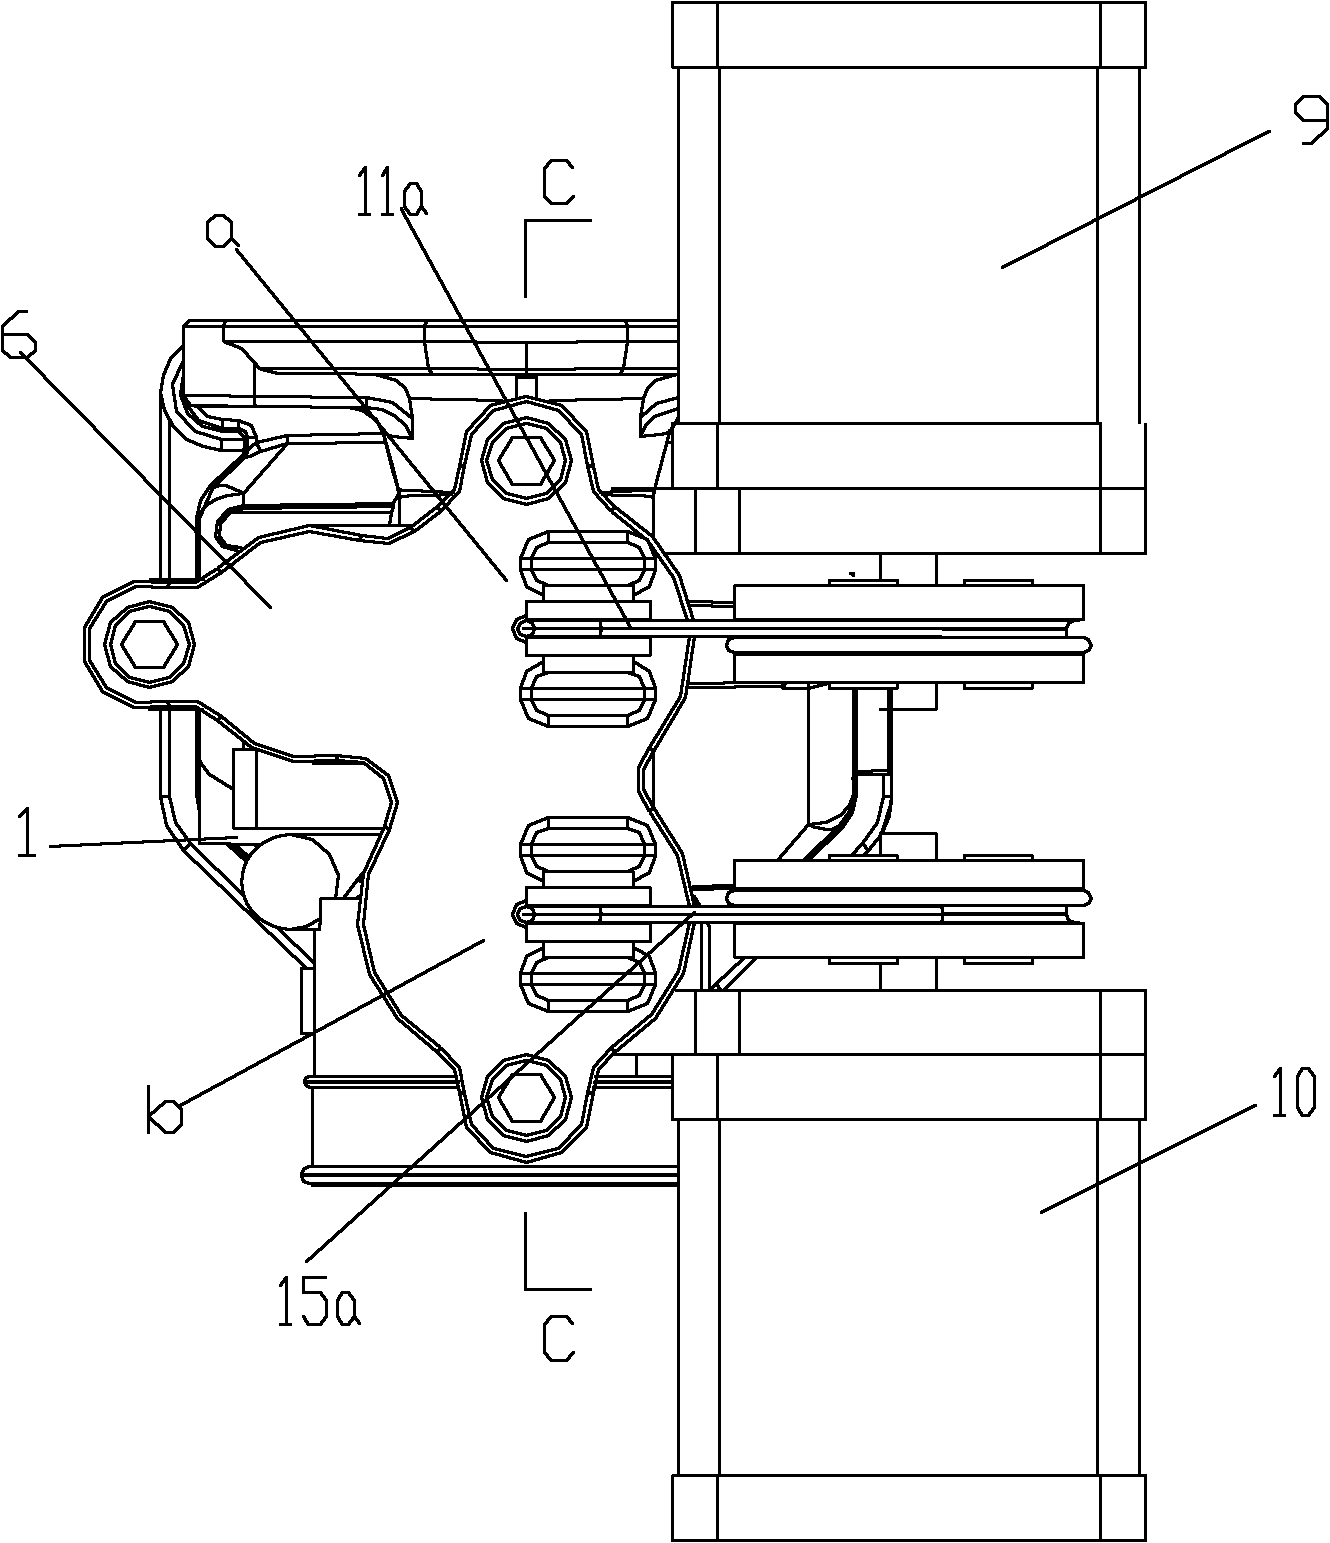 Electronic tube type transmission and sensing fine trimming intelligent oil feeder